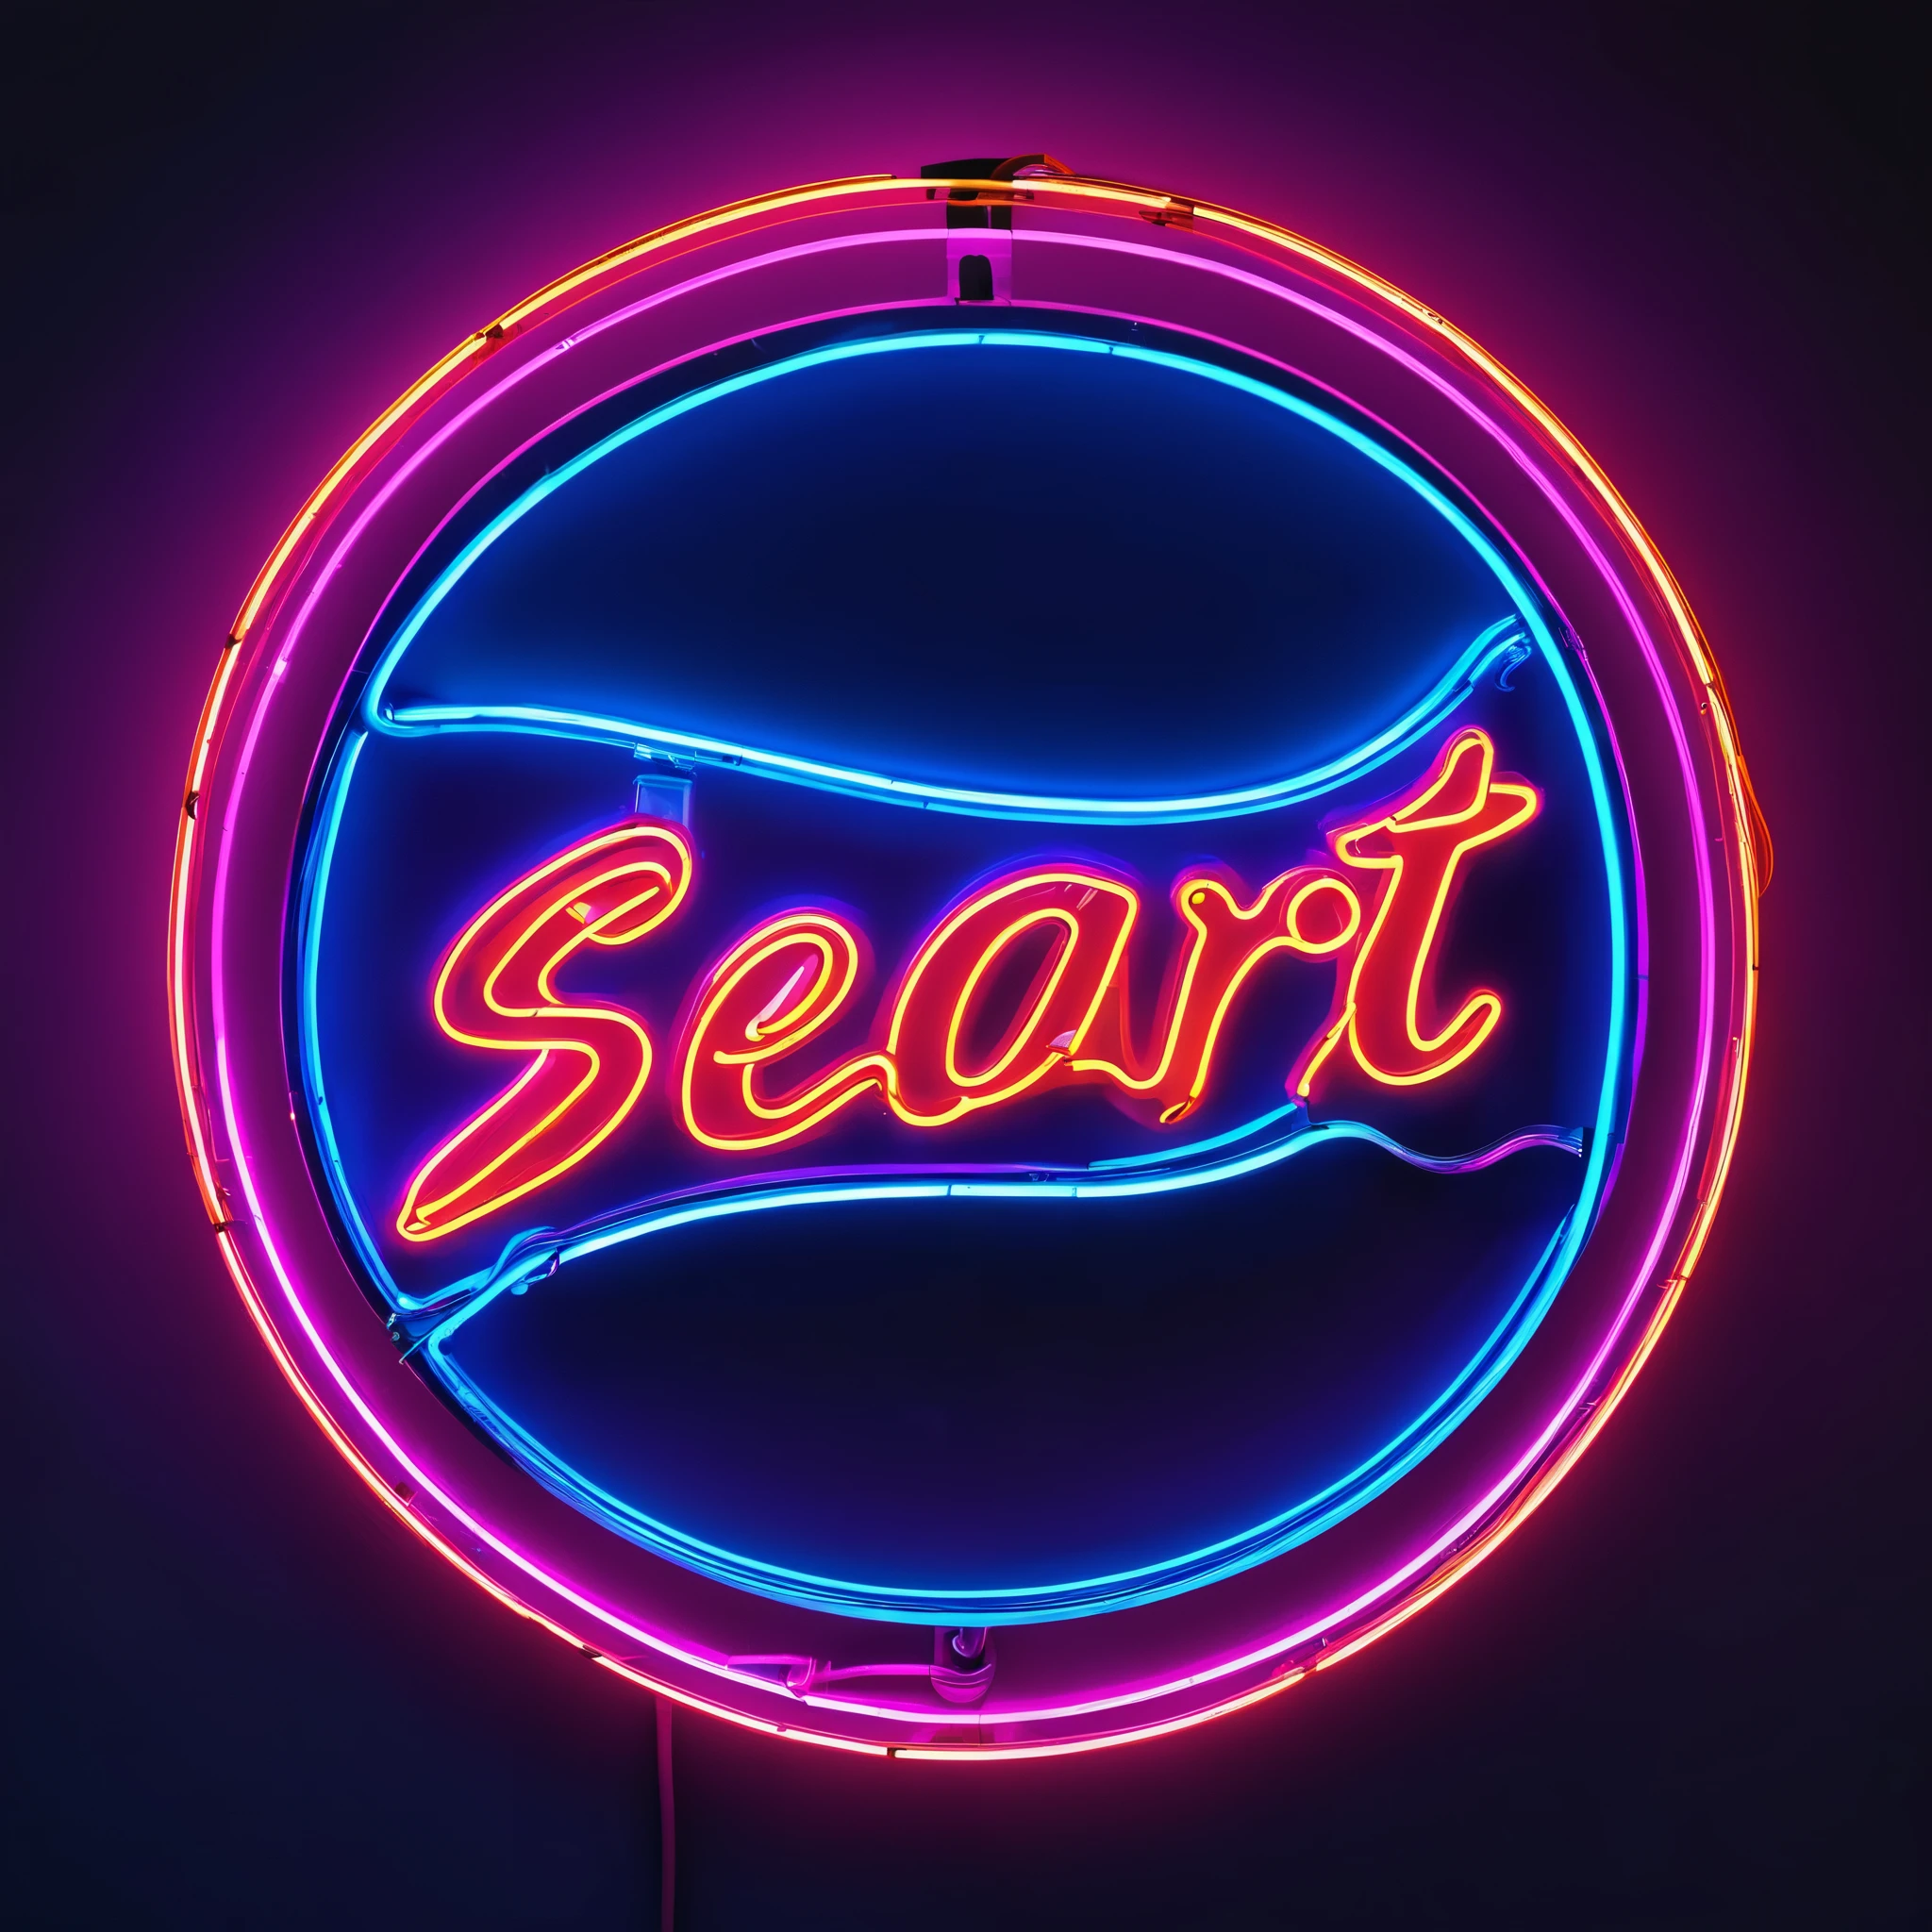 a neon sign with text 'SeaArt',a neon sign,[neon lights, vibrant colors, glowing effect],(best quality,highres),(realistic:1.37)
